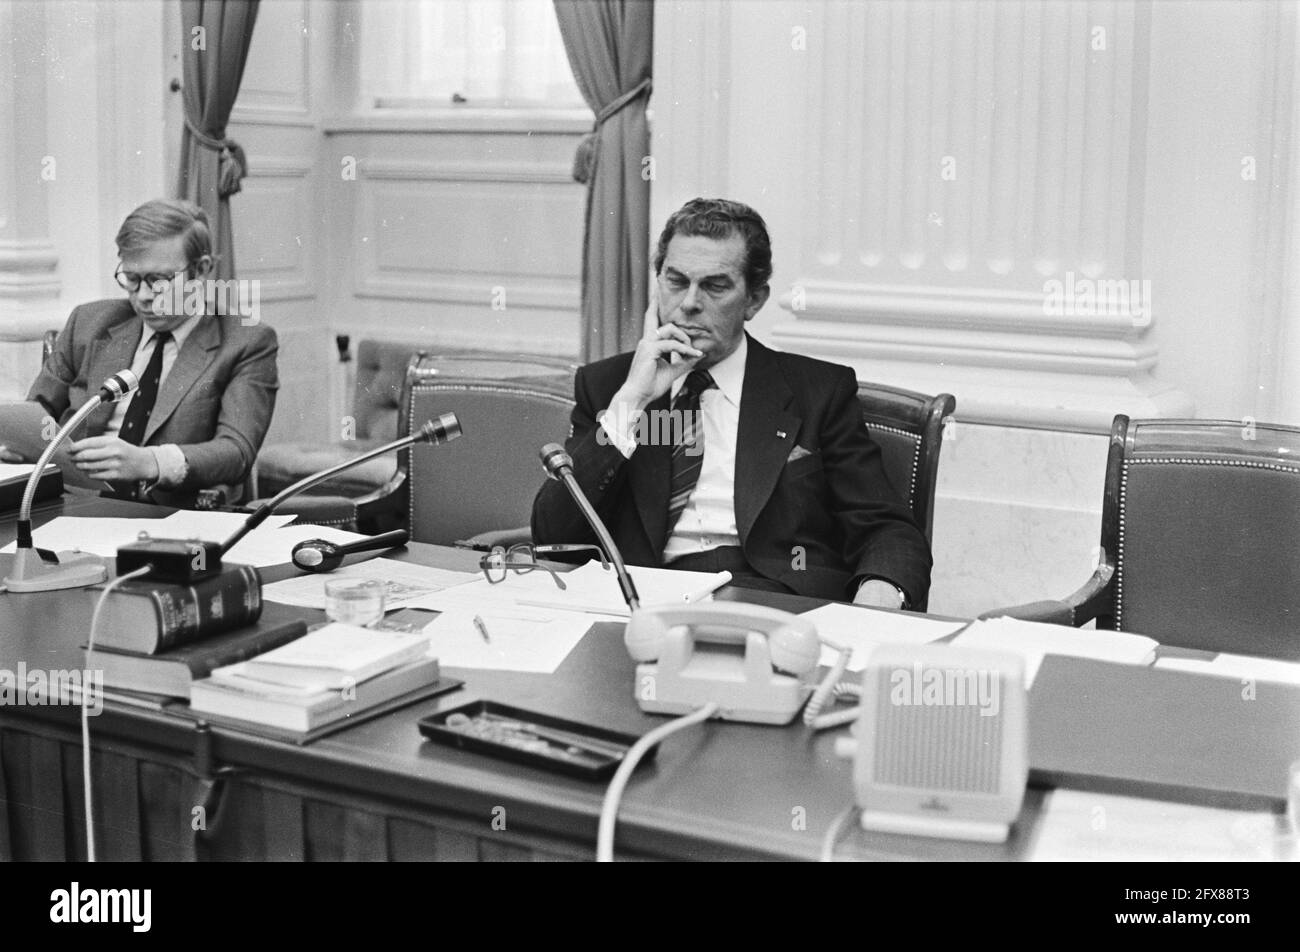 Barend Biesheuvel behind government table Lower House in connection with meeting of Committee on Atlantic Affairs of which he is chairman, October 7, 1977, Meetings, The Netherlands, 20th century press agency photo, news to remember, documentary, historic photography 1945-1990, visual stories, human history of the Twentieth Century, capturing moments in time Stock Photo